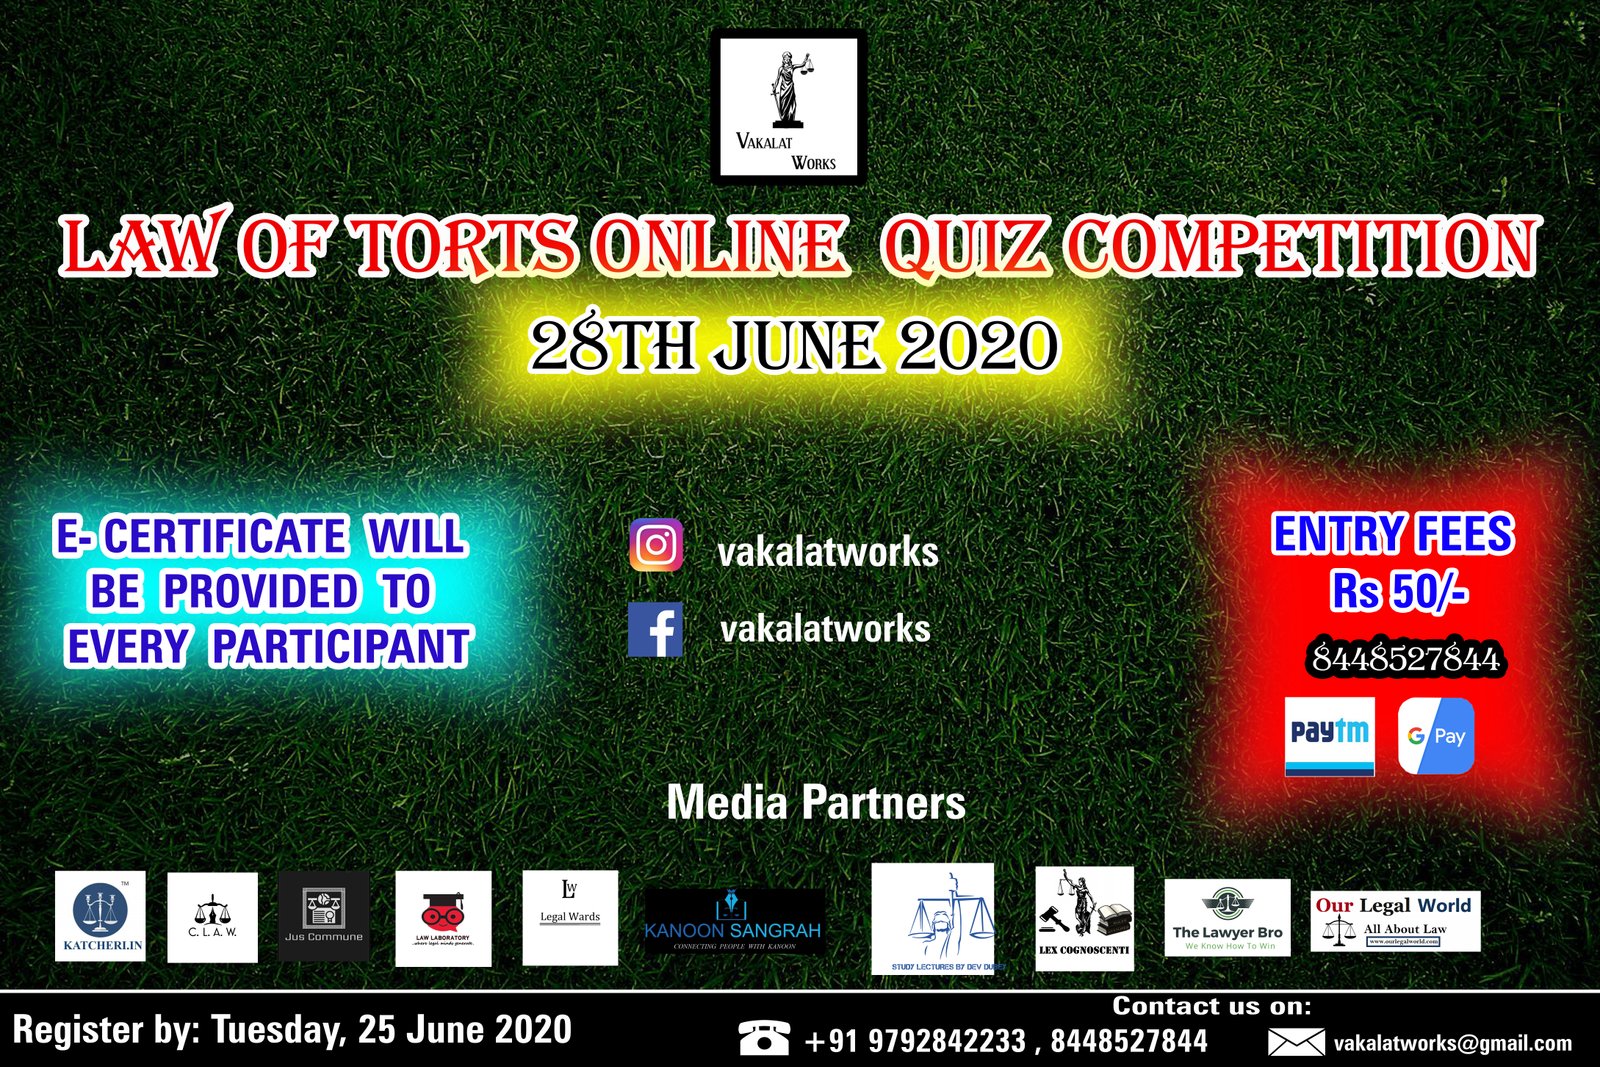 LAW OF TORTS ONLINE QUIZ COMPETITION By Vakalat Works: Apply by 25TH June, 2020